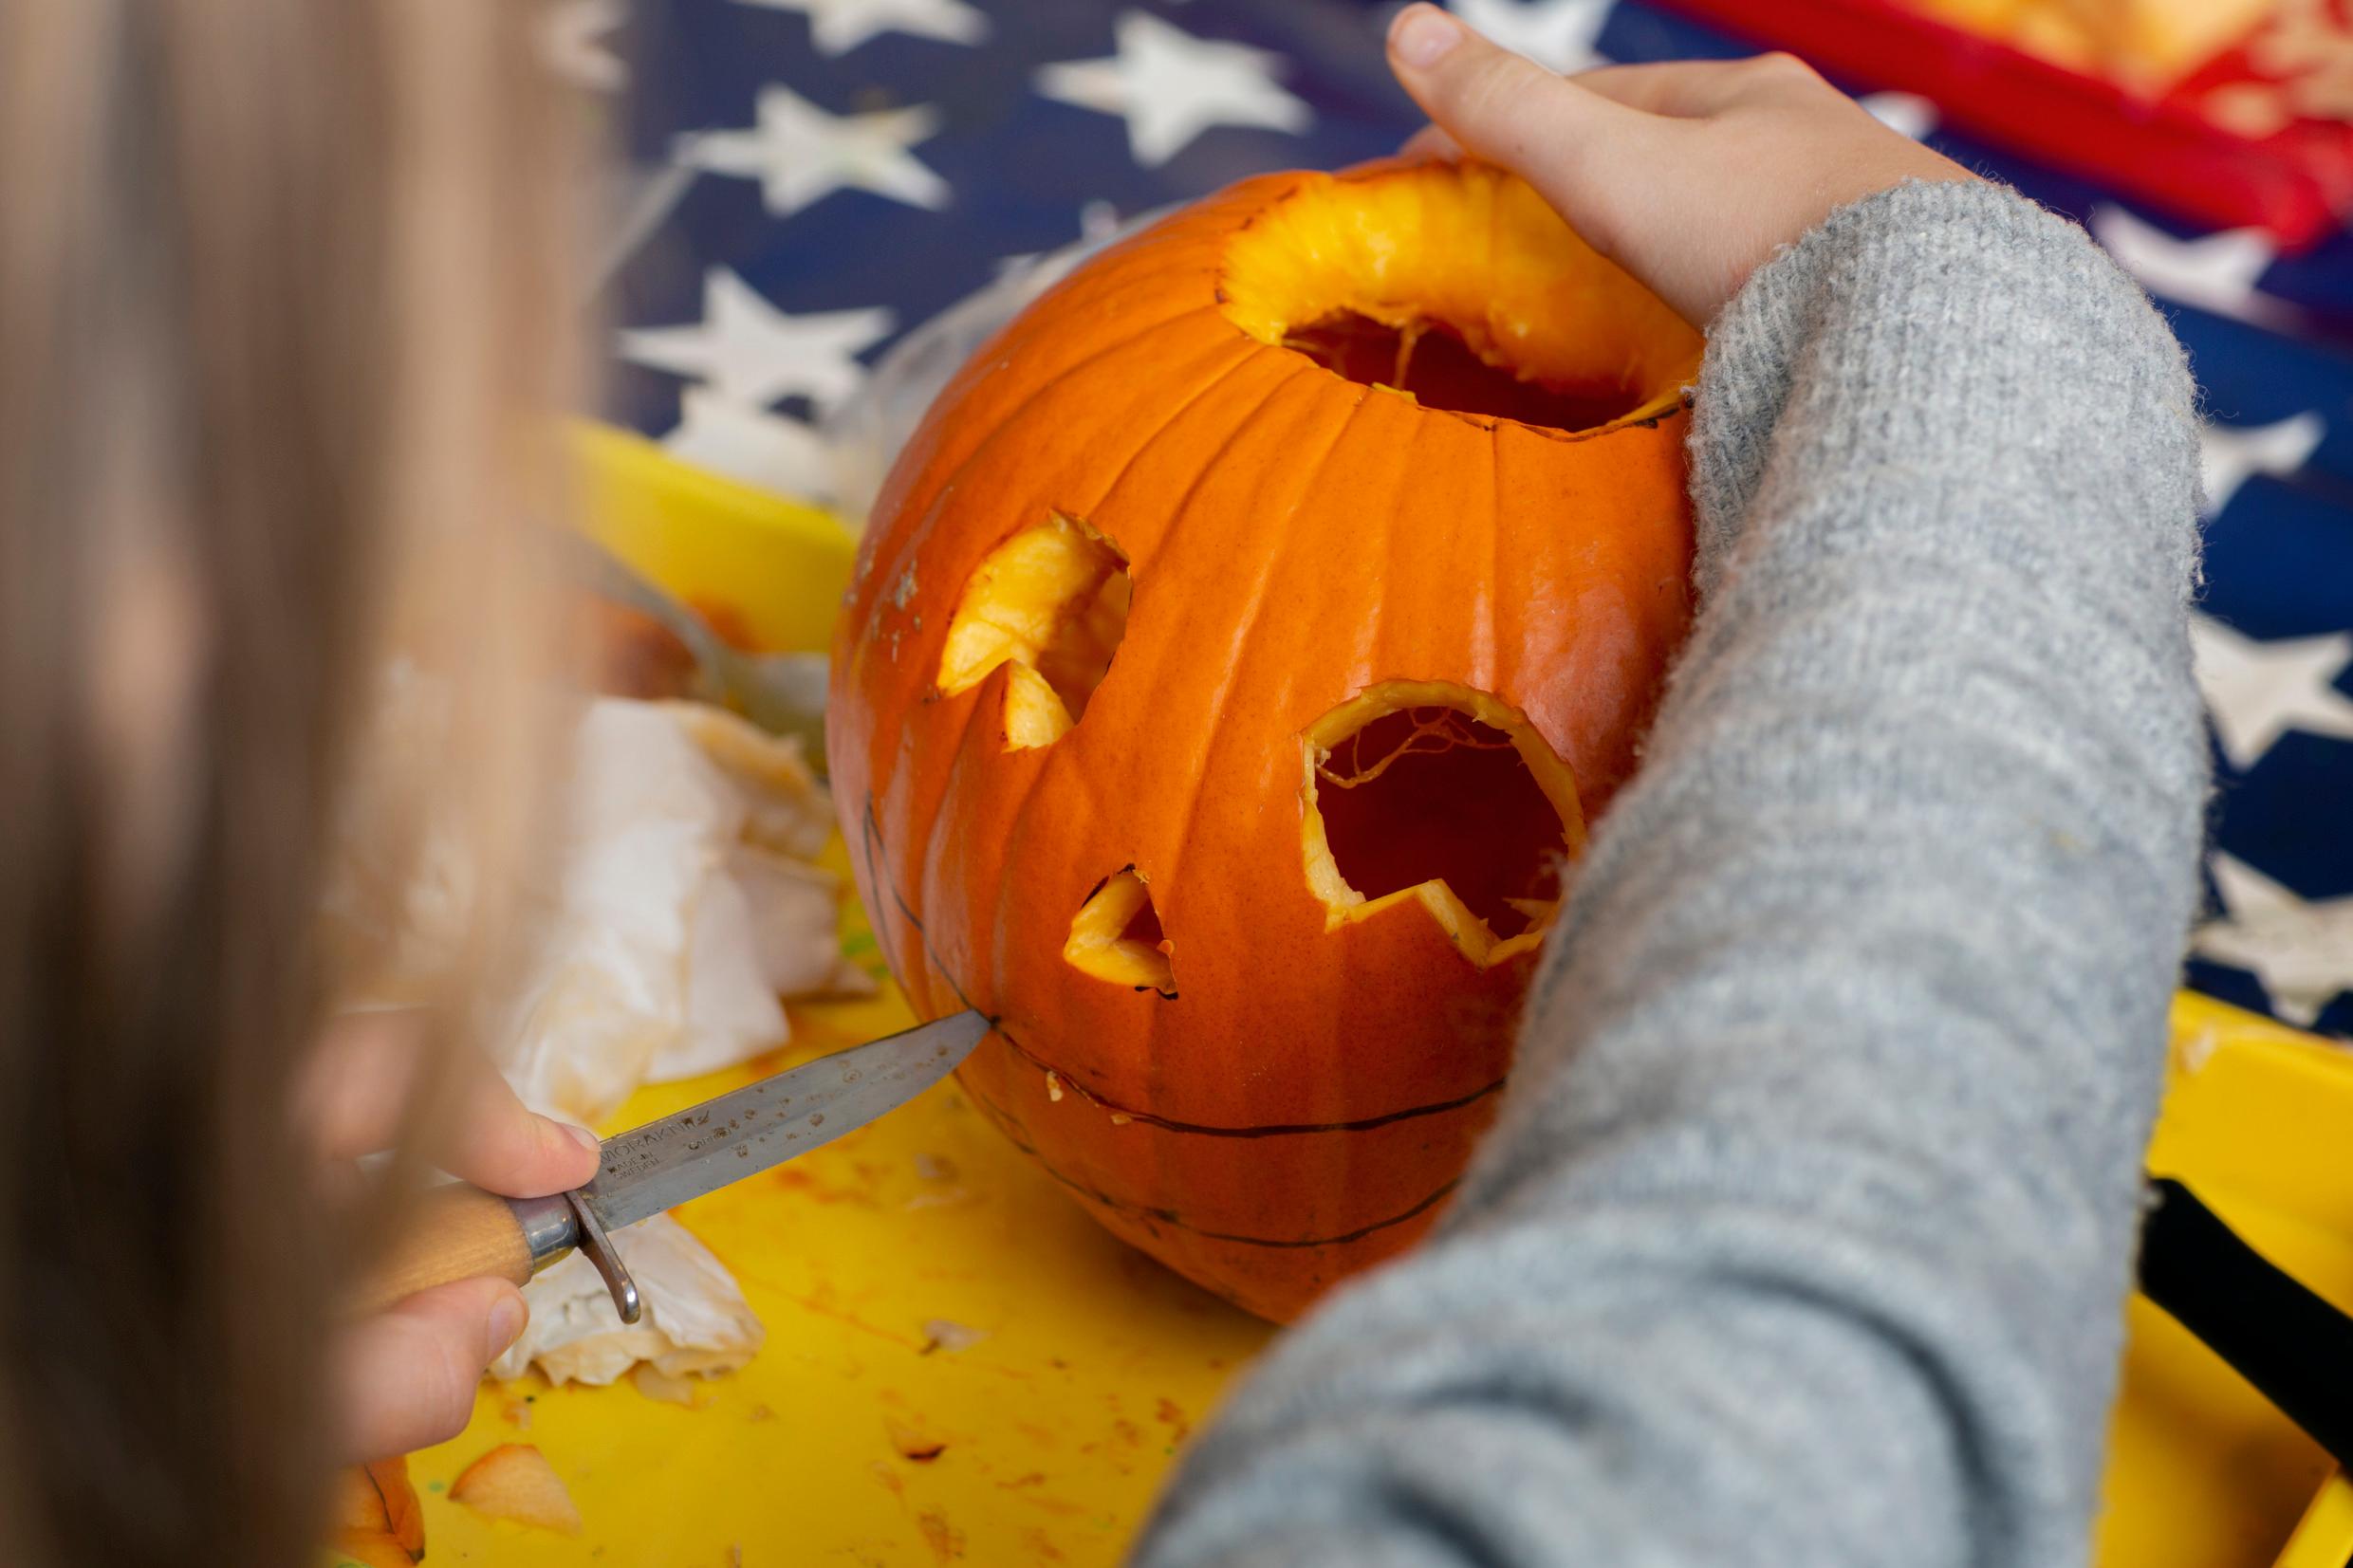 The hand of a child carving a Halloween pumpkin.